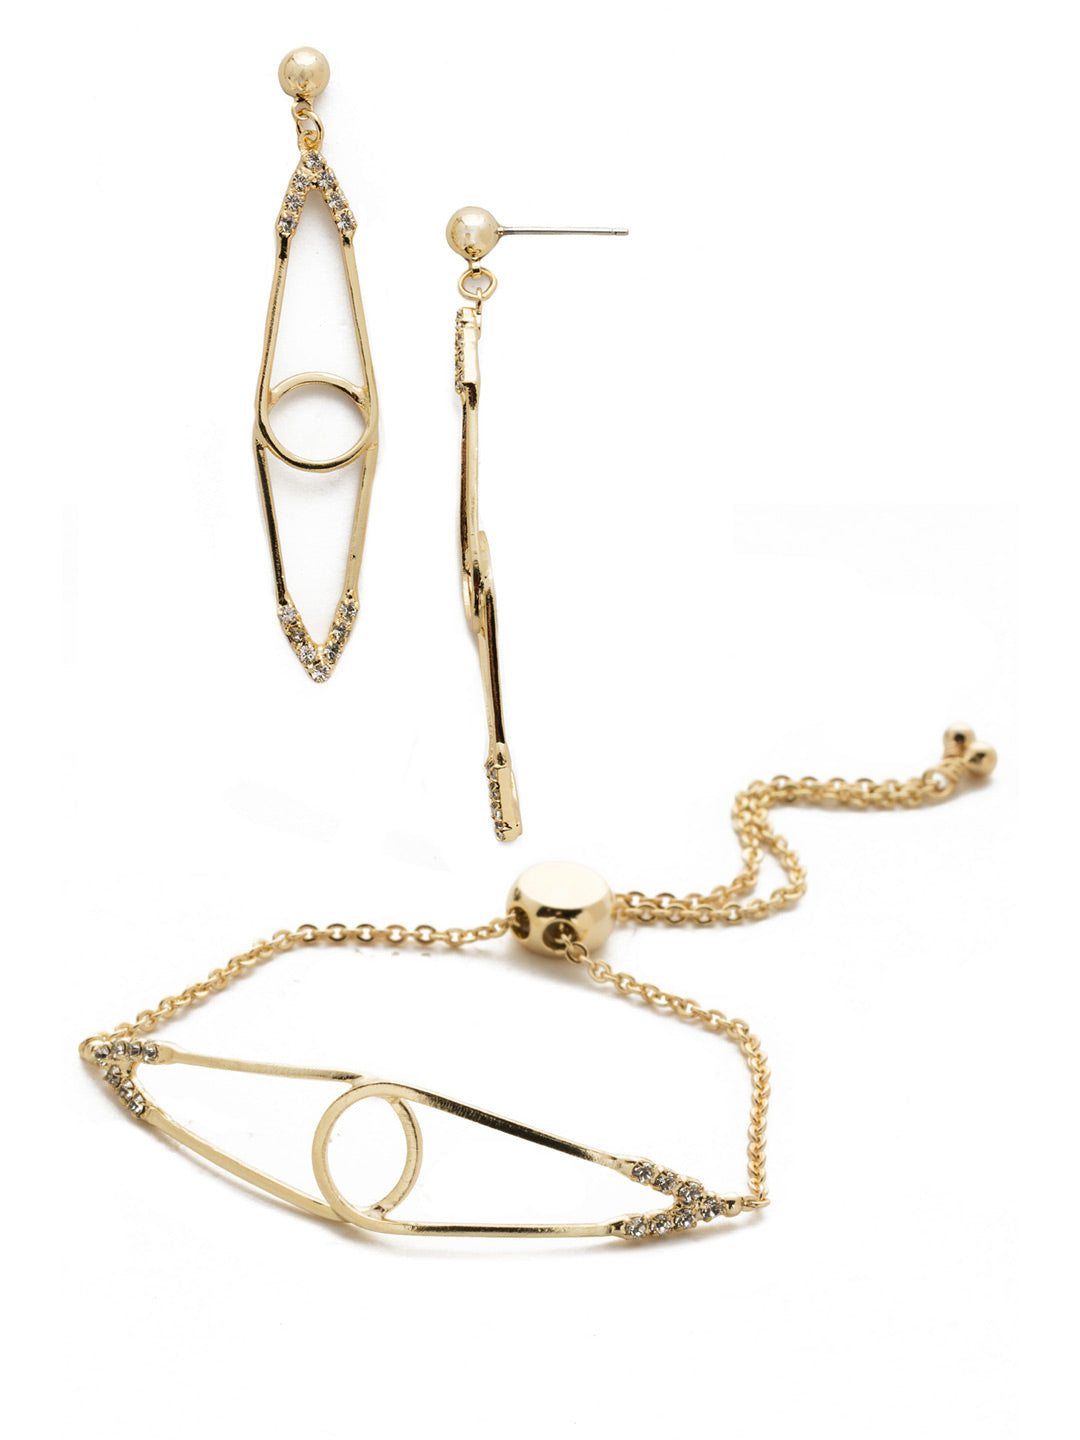 Discerning Eye Earrings/Bracelet Gift Set - GCT111BGCRY - <p>Discerning Eye gift set has a unique design with a hint of sparkle with crystal edges in this earring and bracelet set. From Sorrelli's Crystal collection in our Bright Gold-tone finish.</p>